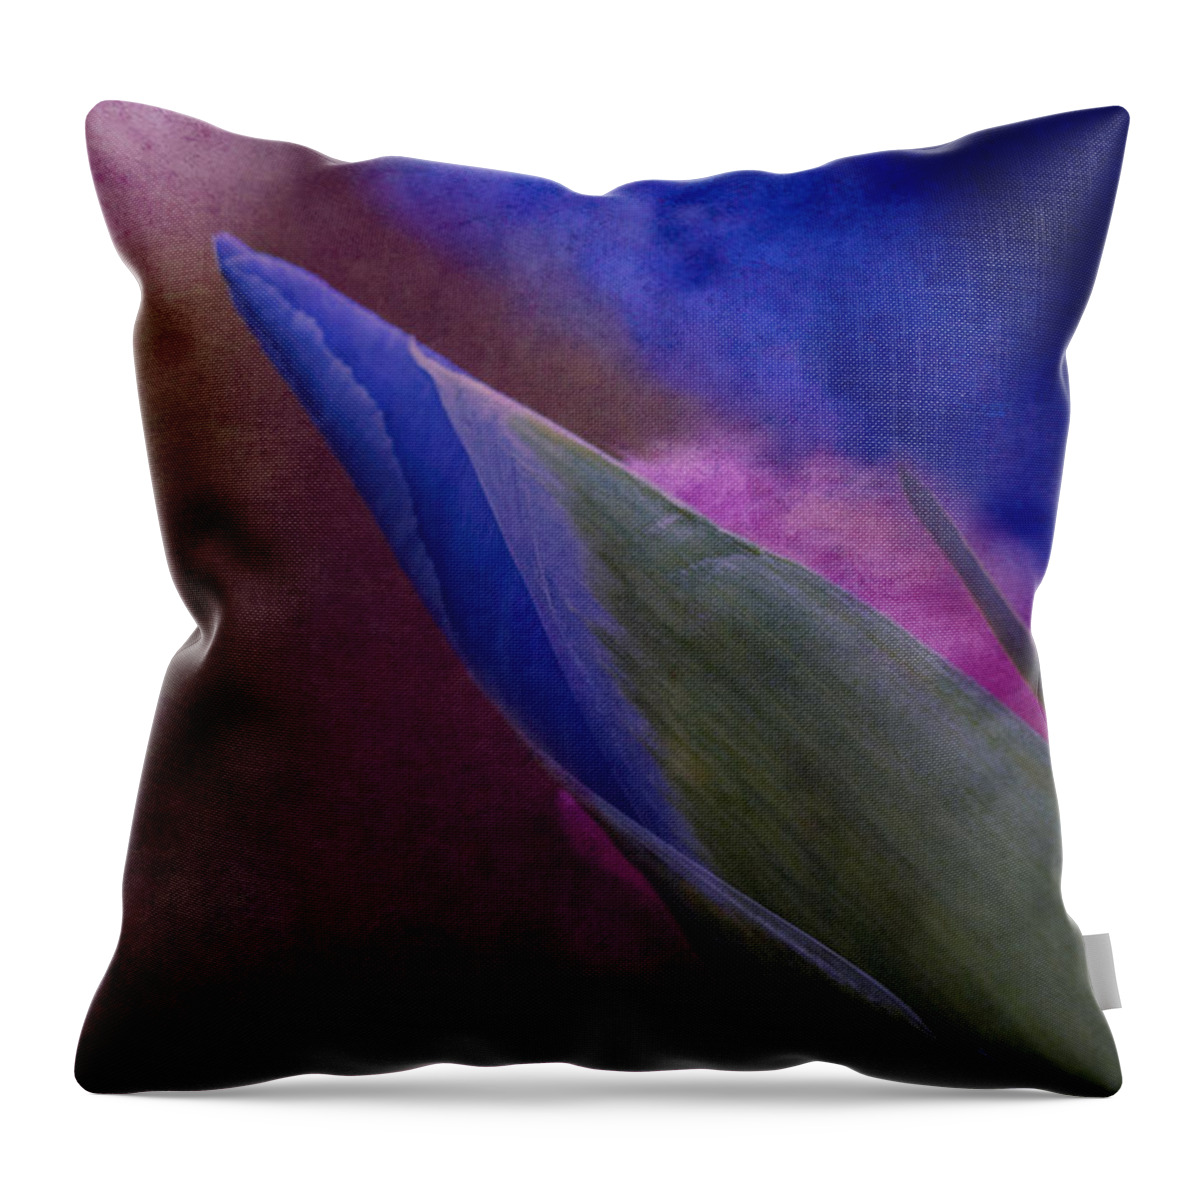 Iris Throw Pillow featuring the photograph Iris To The Point by Arlene Carmel